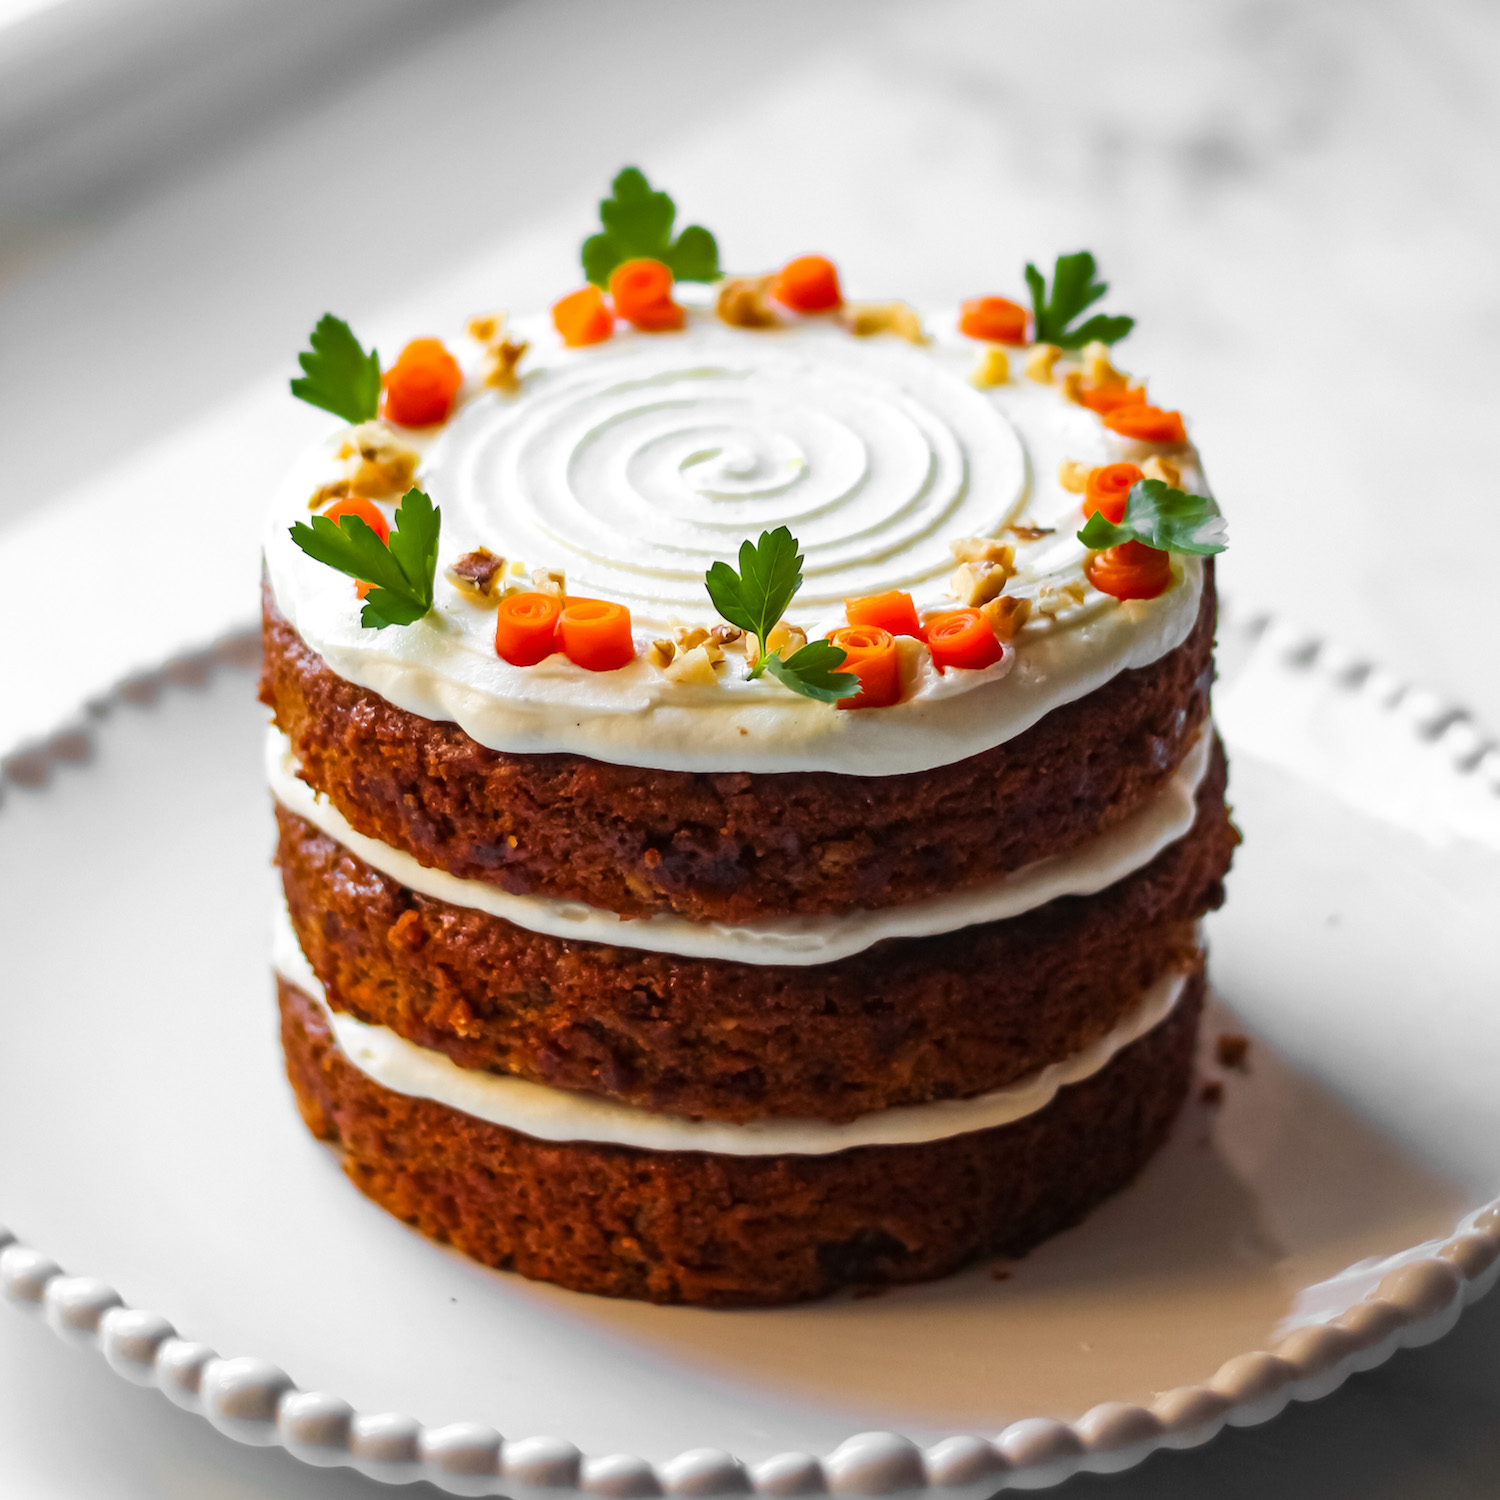 Best-Ever Carrot Cake & Cream Cheese Frosting